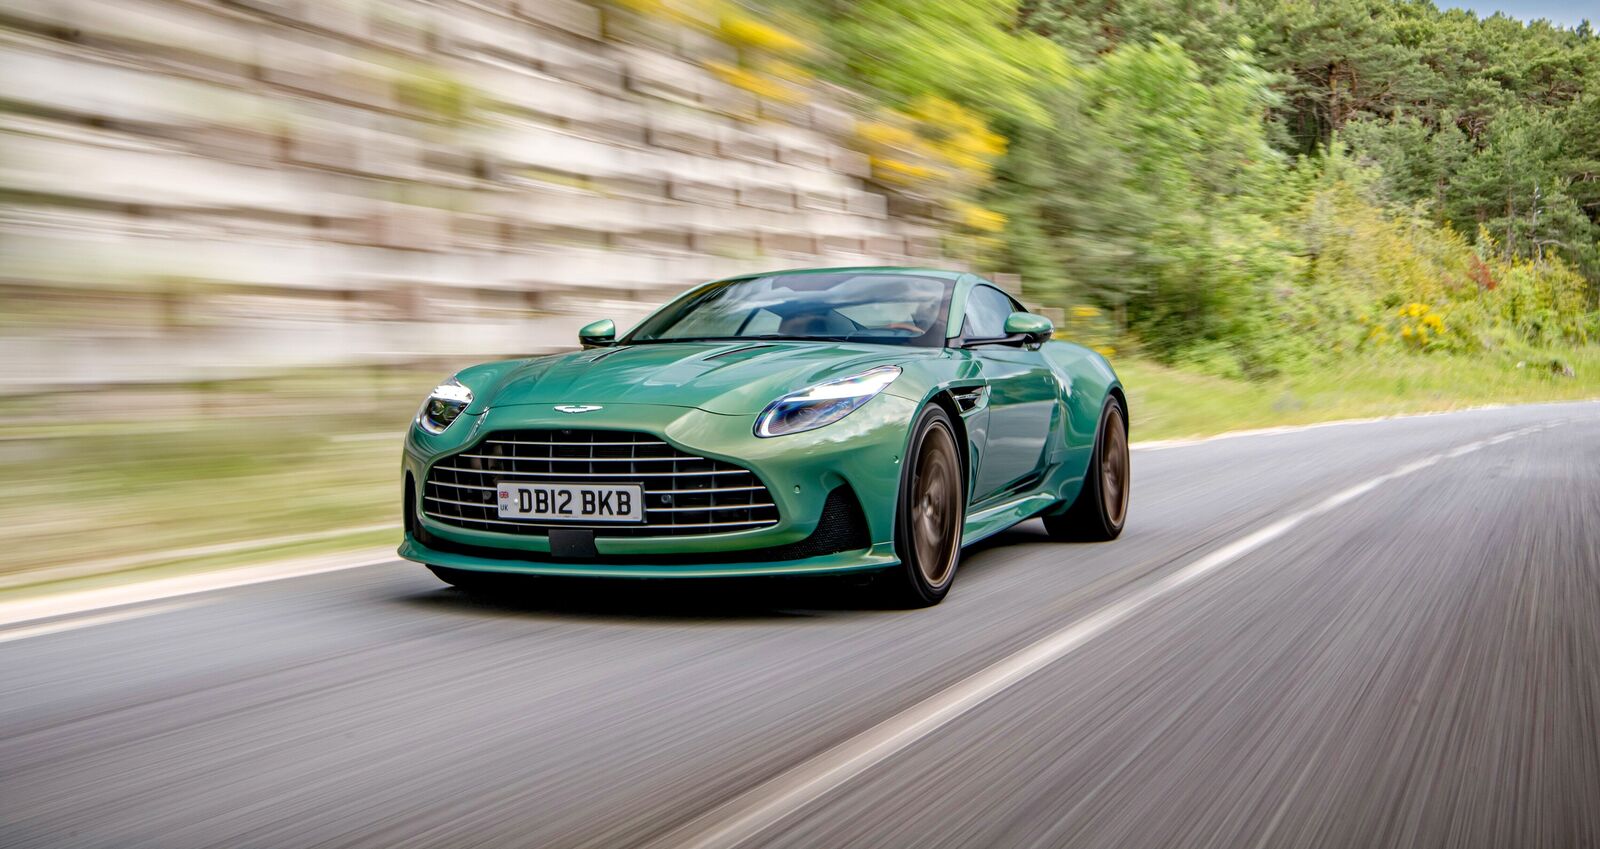 Aston Martin to roll out DB12 in India today: What we know so far